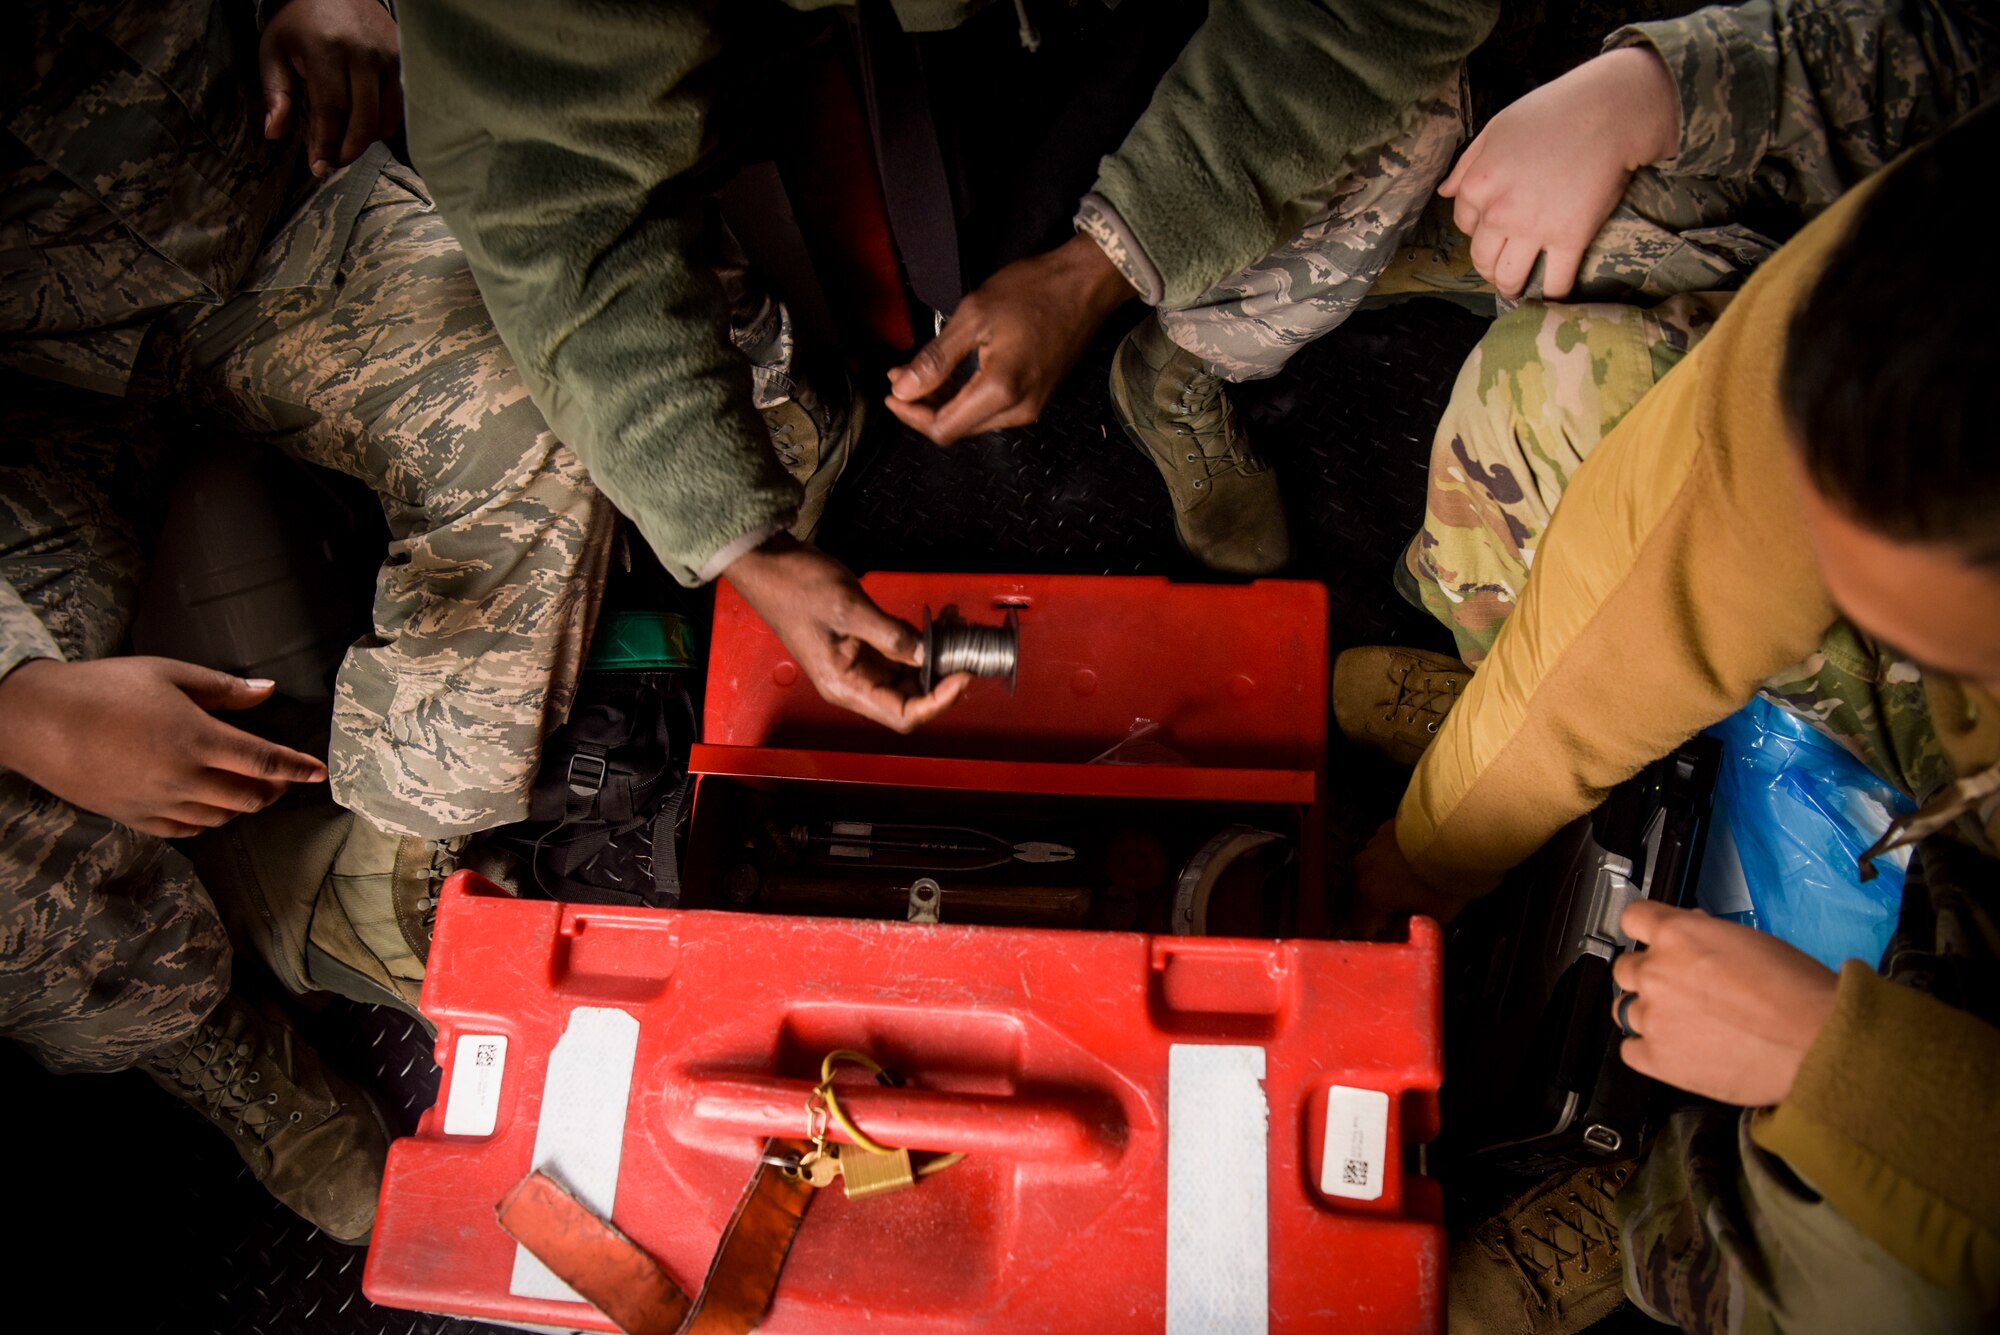 U.S. Air Force Airmen from the 100th Maintenance Squadron, reset their toolbox on the floor of the empty truck bay at RAF Mildenhall, England, Oct. 28, 2019. When new trucks come to RAF Mildenhall to join the RIET ‘ready-made, integrated, expeditor truck’ line will have the updated wifi capability, gates, seats, and bay heating, and other attributes. (U.S. Air Force photo by Senior Airman Alexandria Lee)